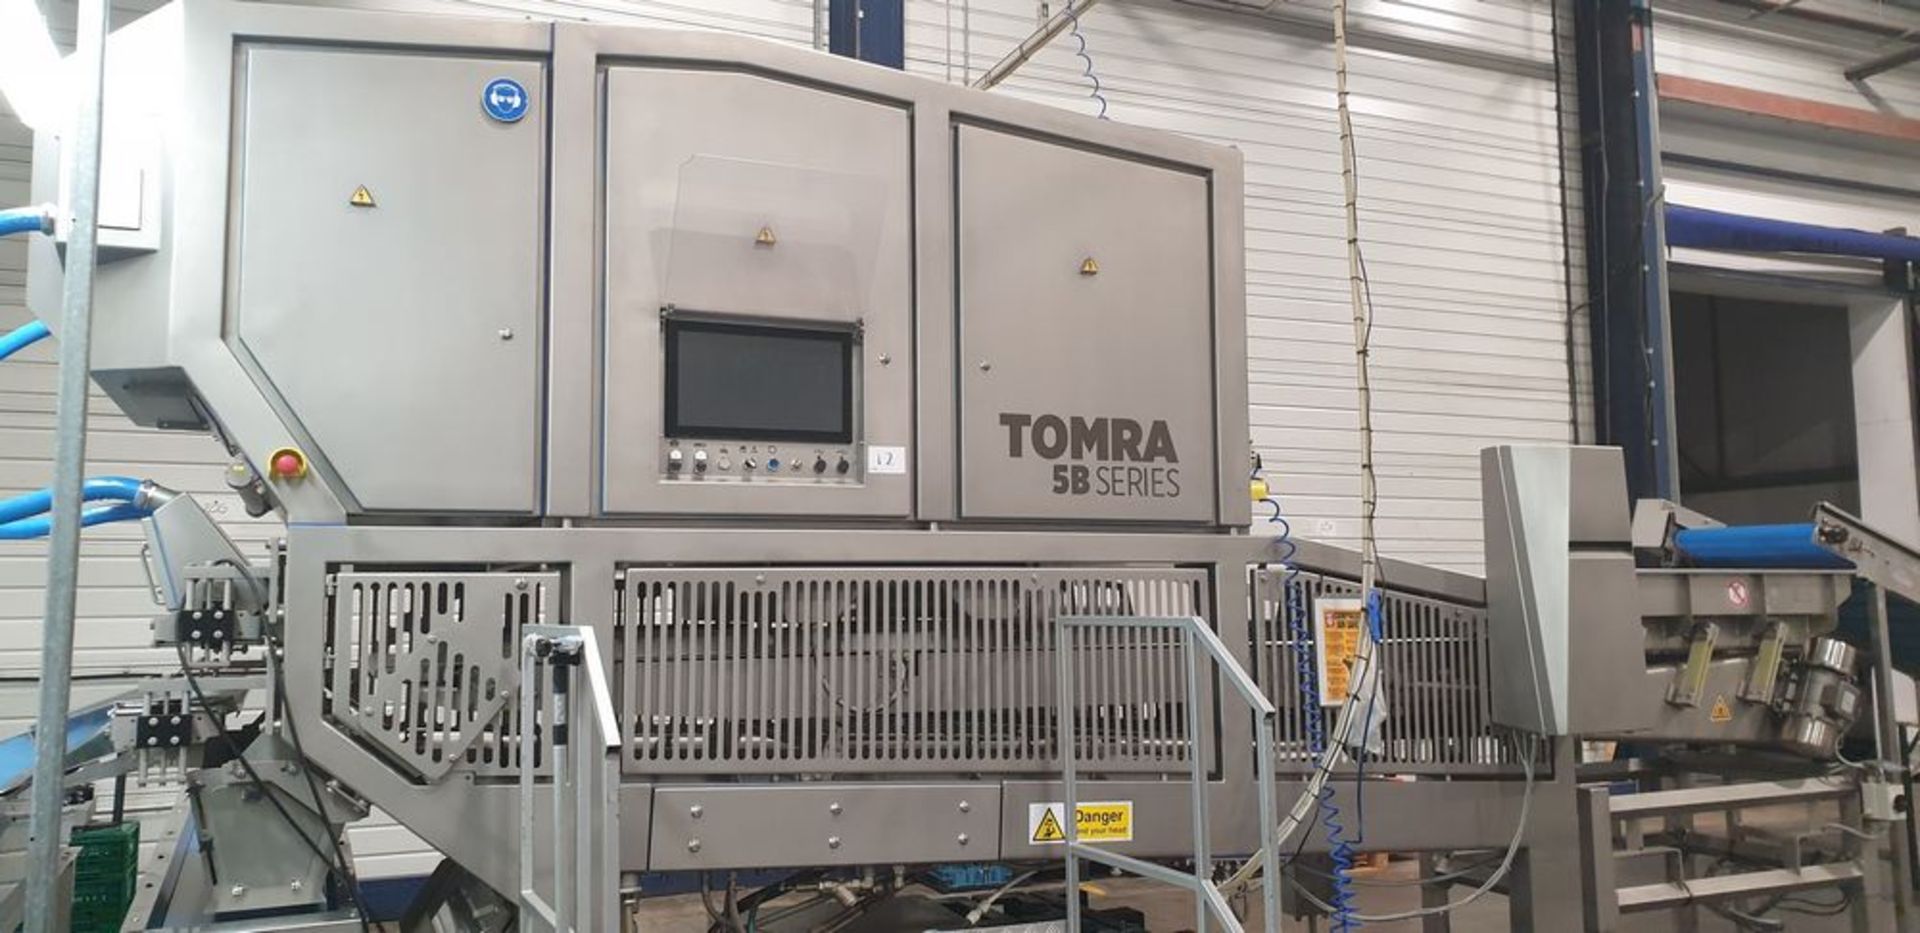 1: Tomra Sorting Solutions 5B Series 800 Sensor Based Sorting Machine complete with touchscreen con - Image 3 of 9